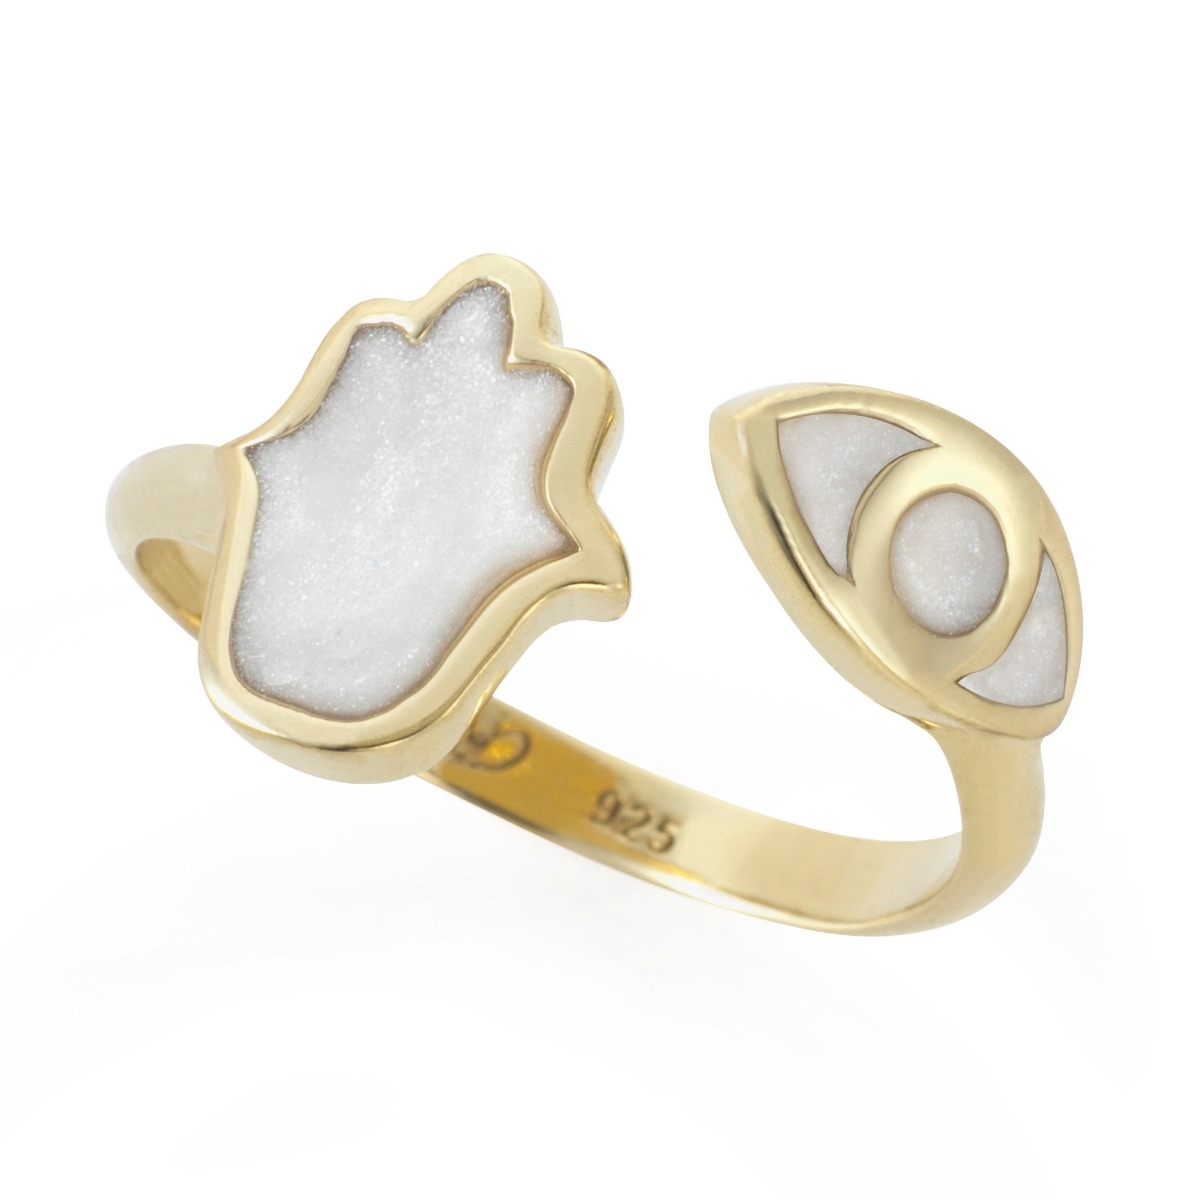 Adina Plastelina 24K Gold Plated Sterling Silver Hamsa and Eye Adjustable Ring – Mother of Pearl - 1